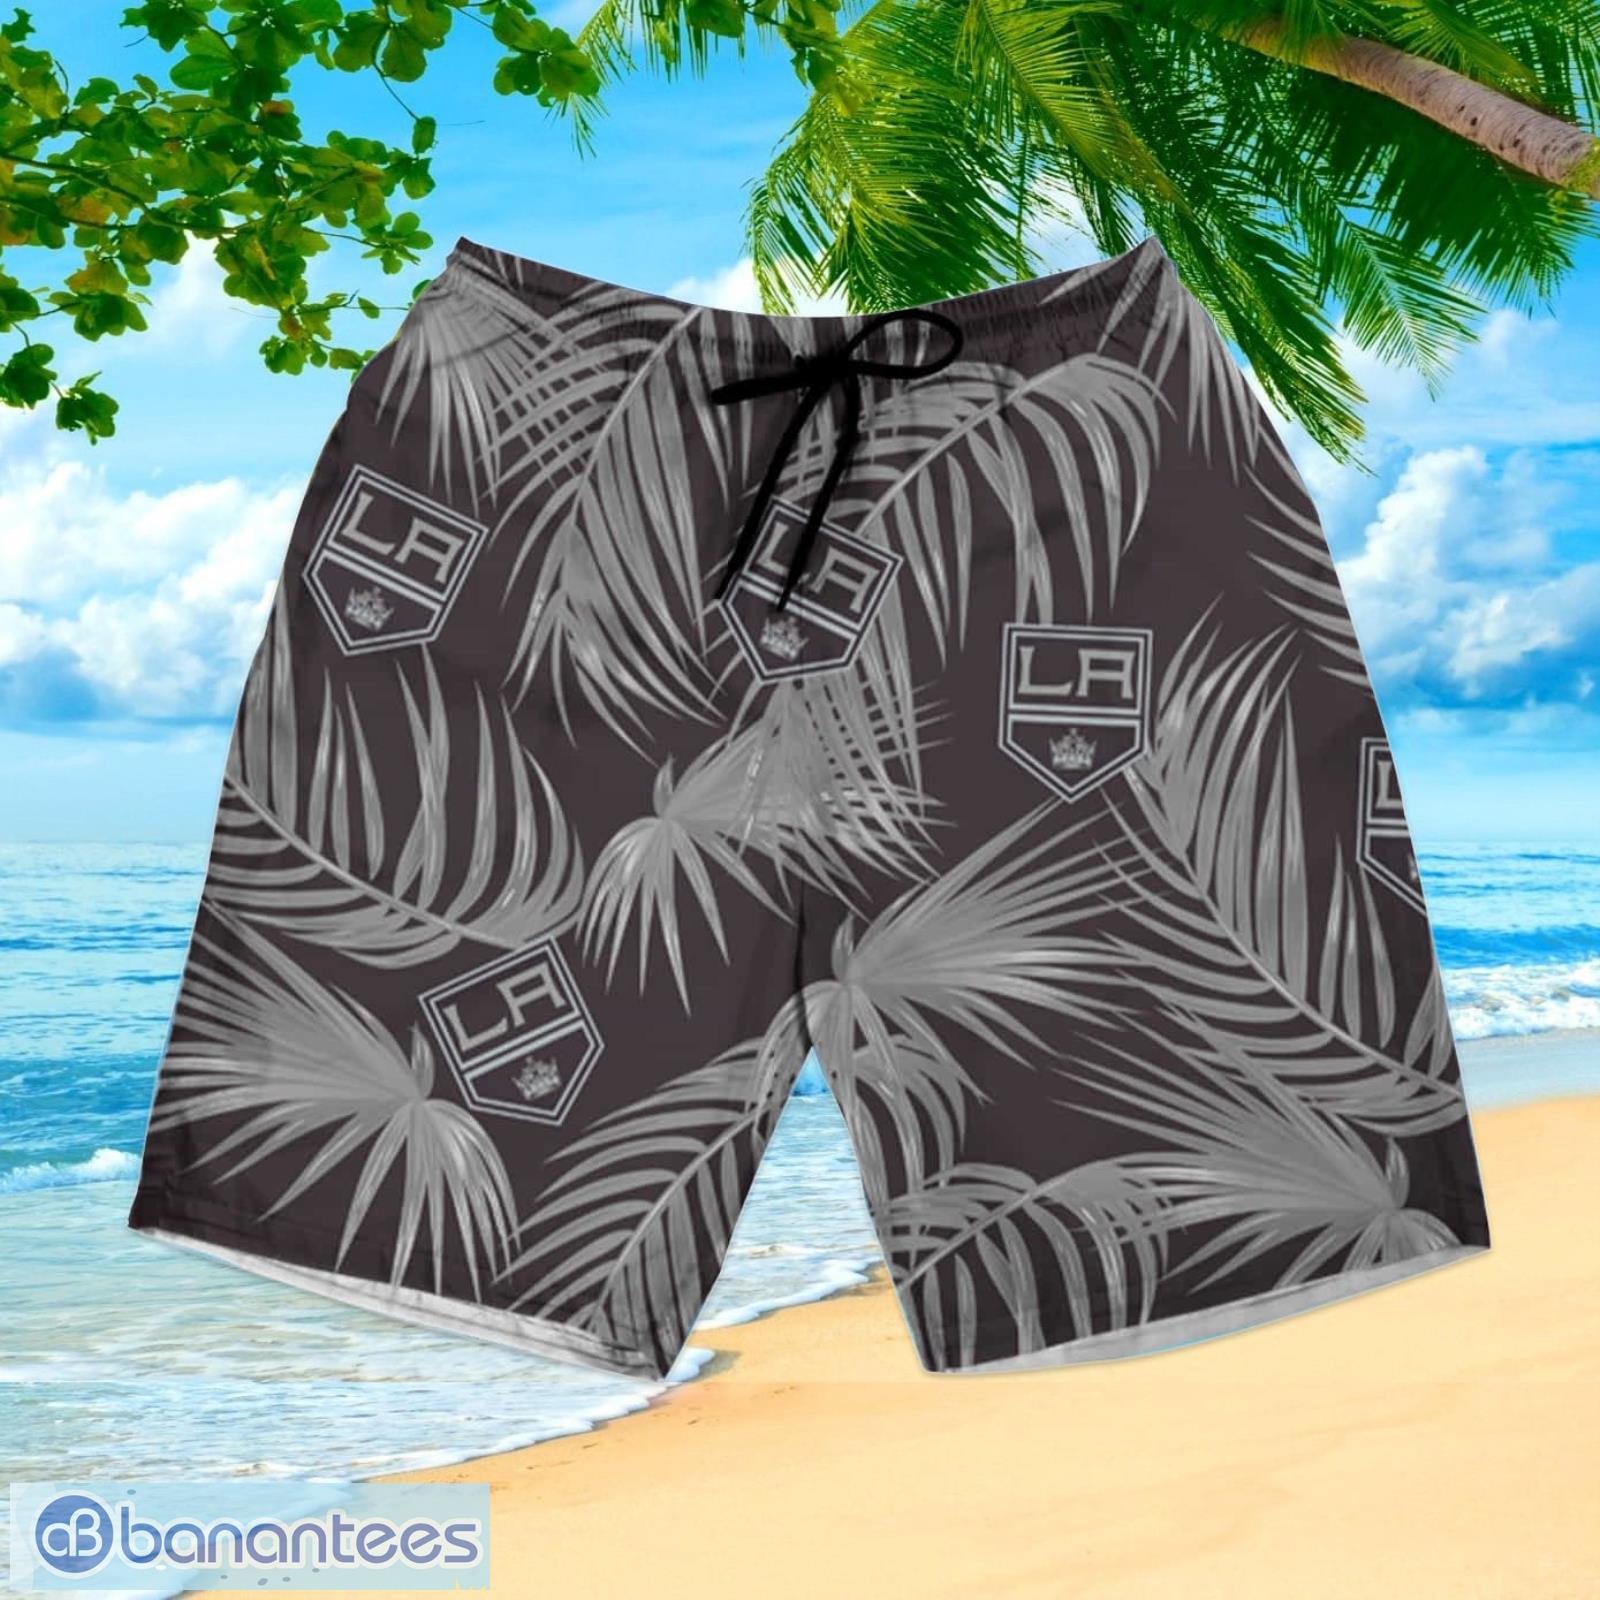 LIMITED] Los Angeles Kings NHL Hawaiian Shirt And Shorts, New Collection  For This Summer